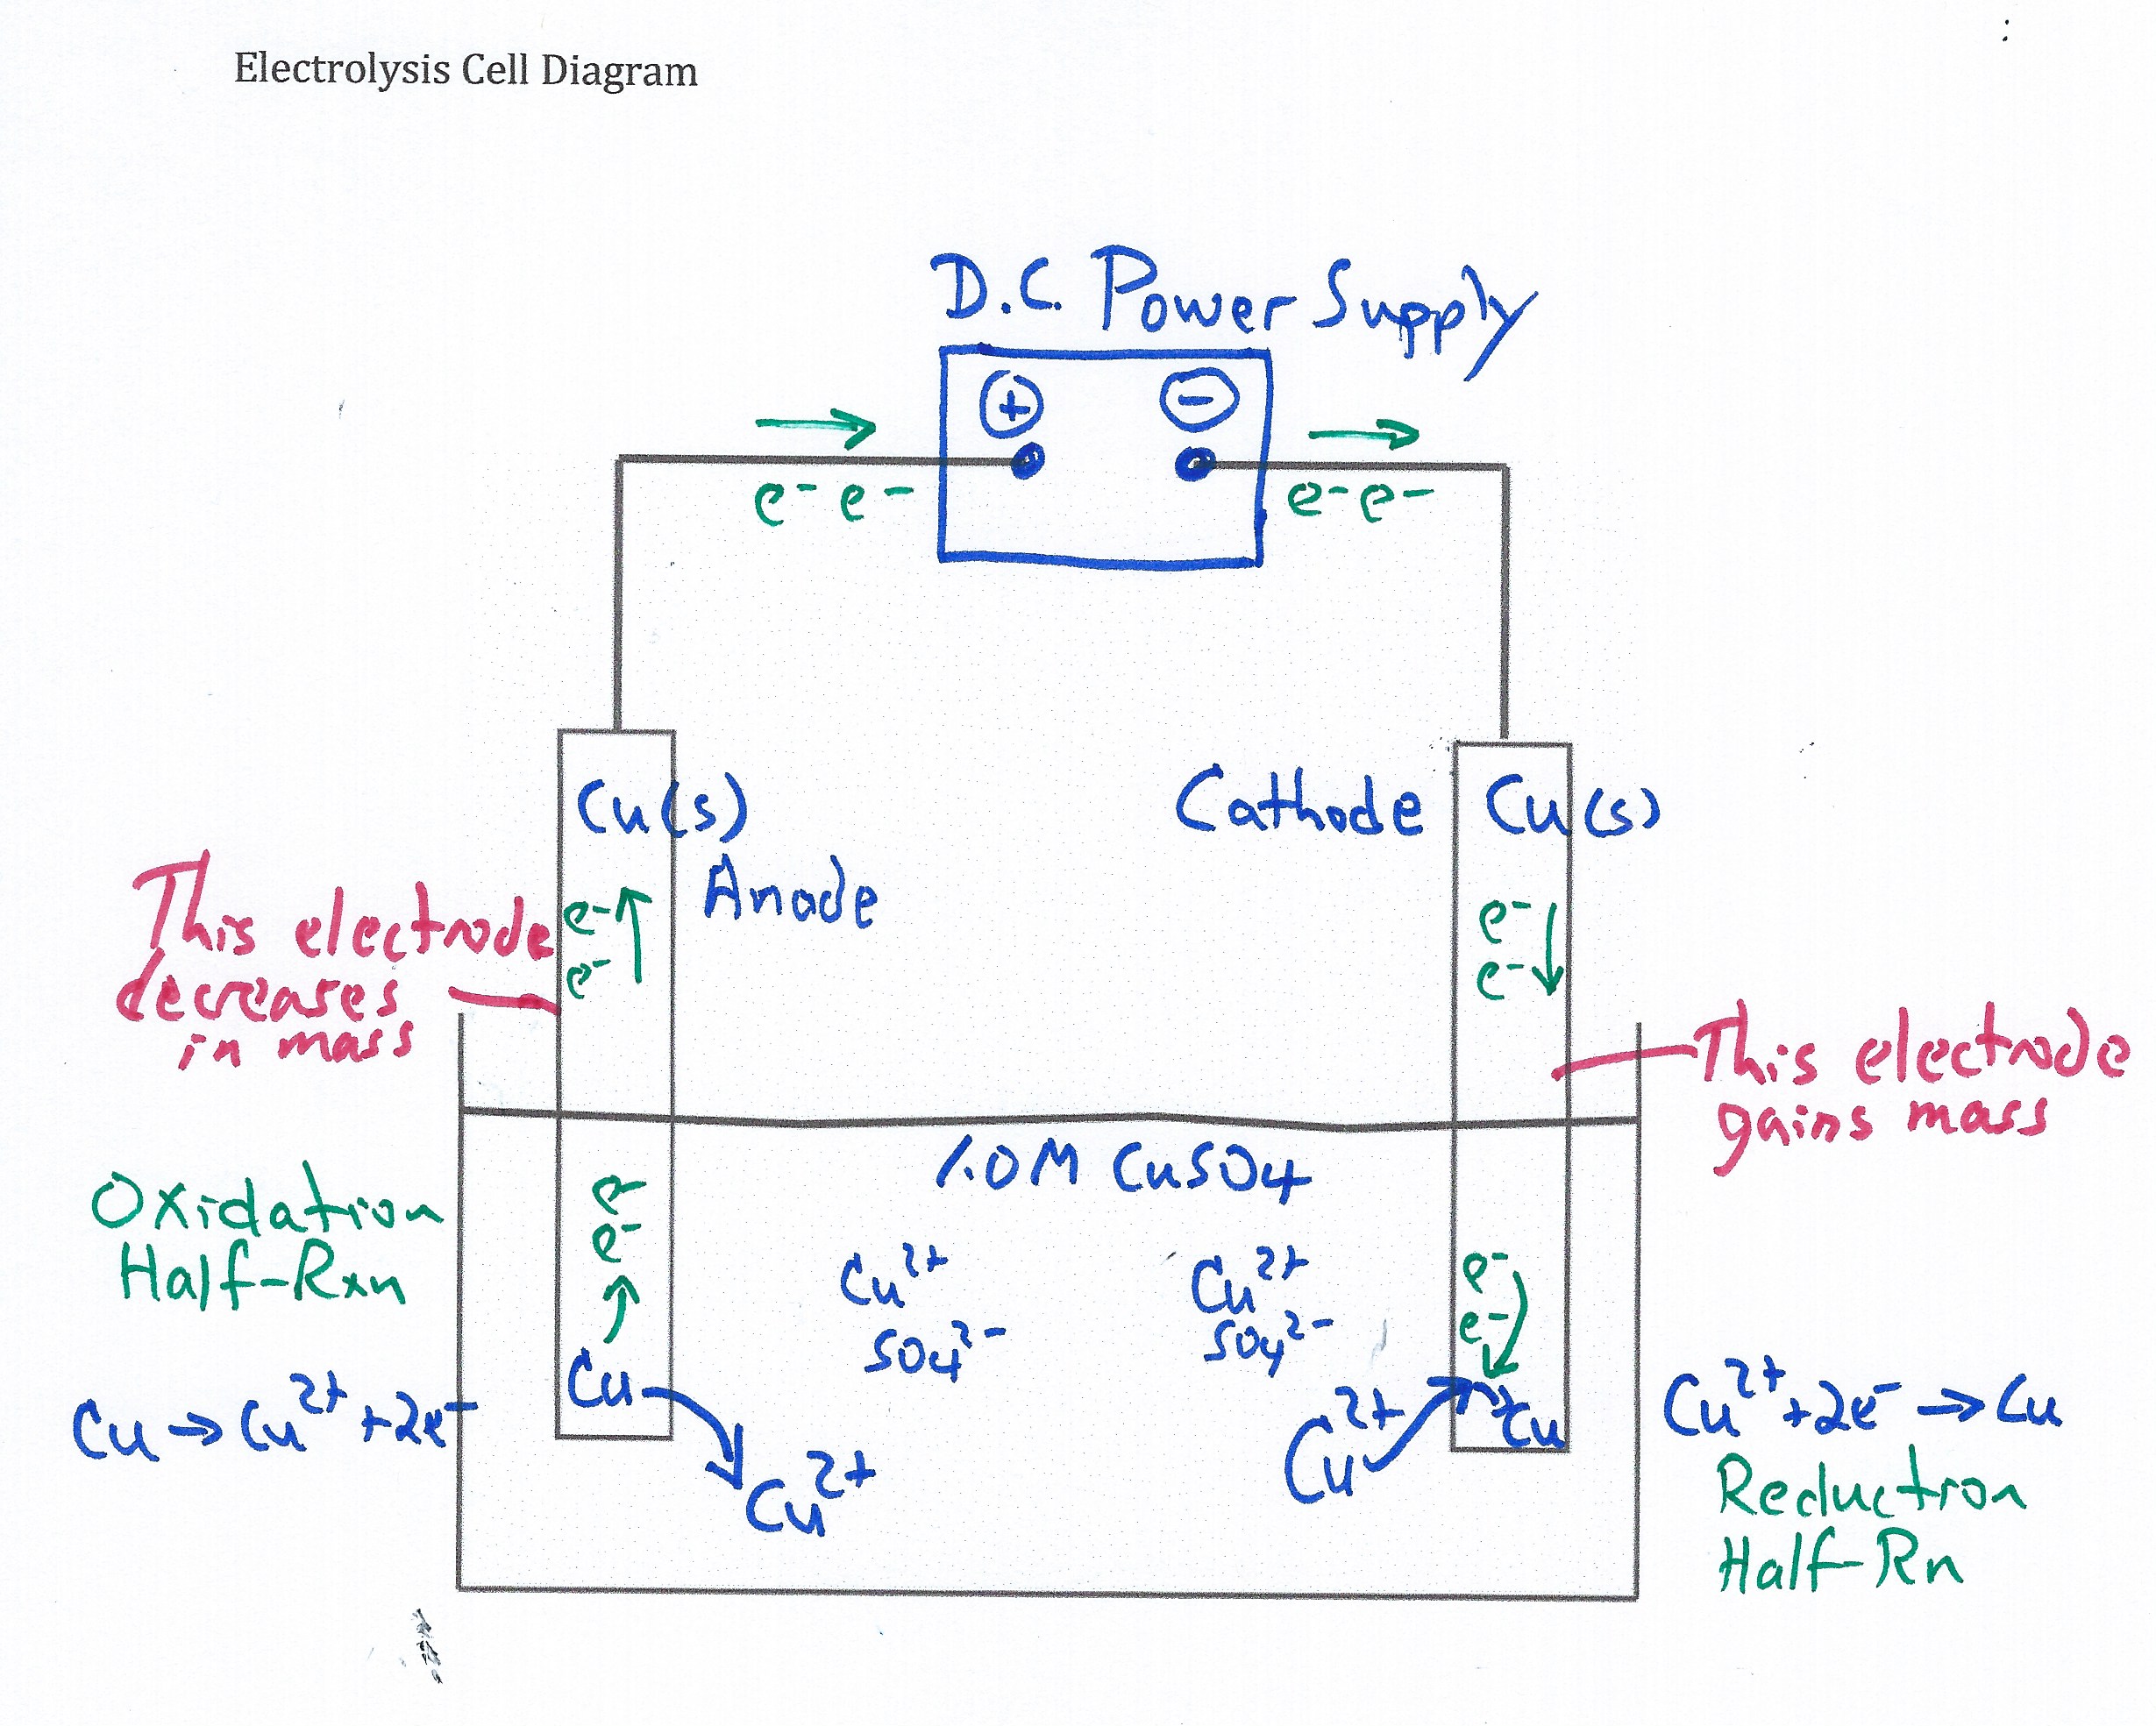 Copper electrolysis cell diagram sstudent work